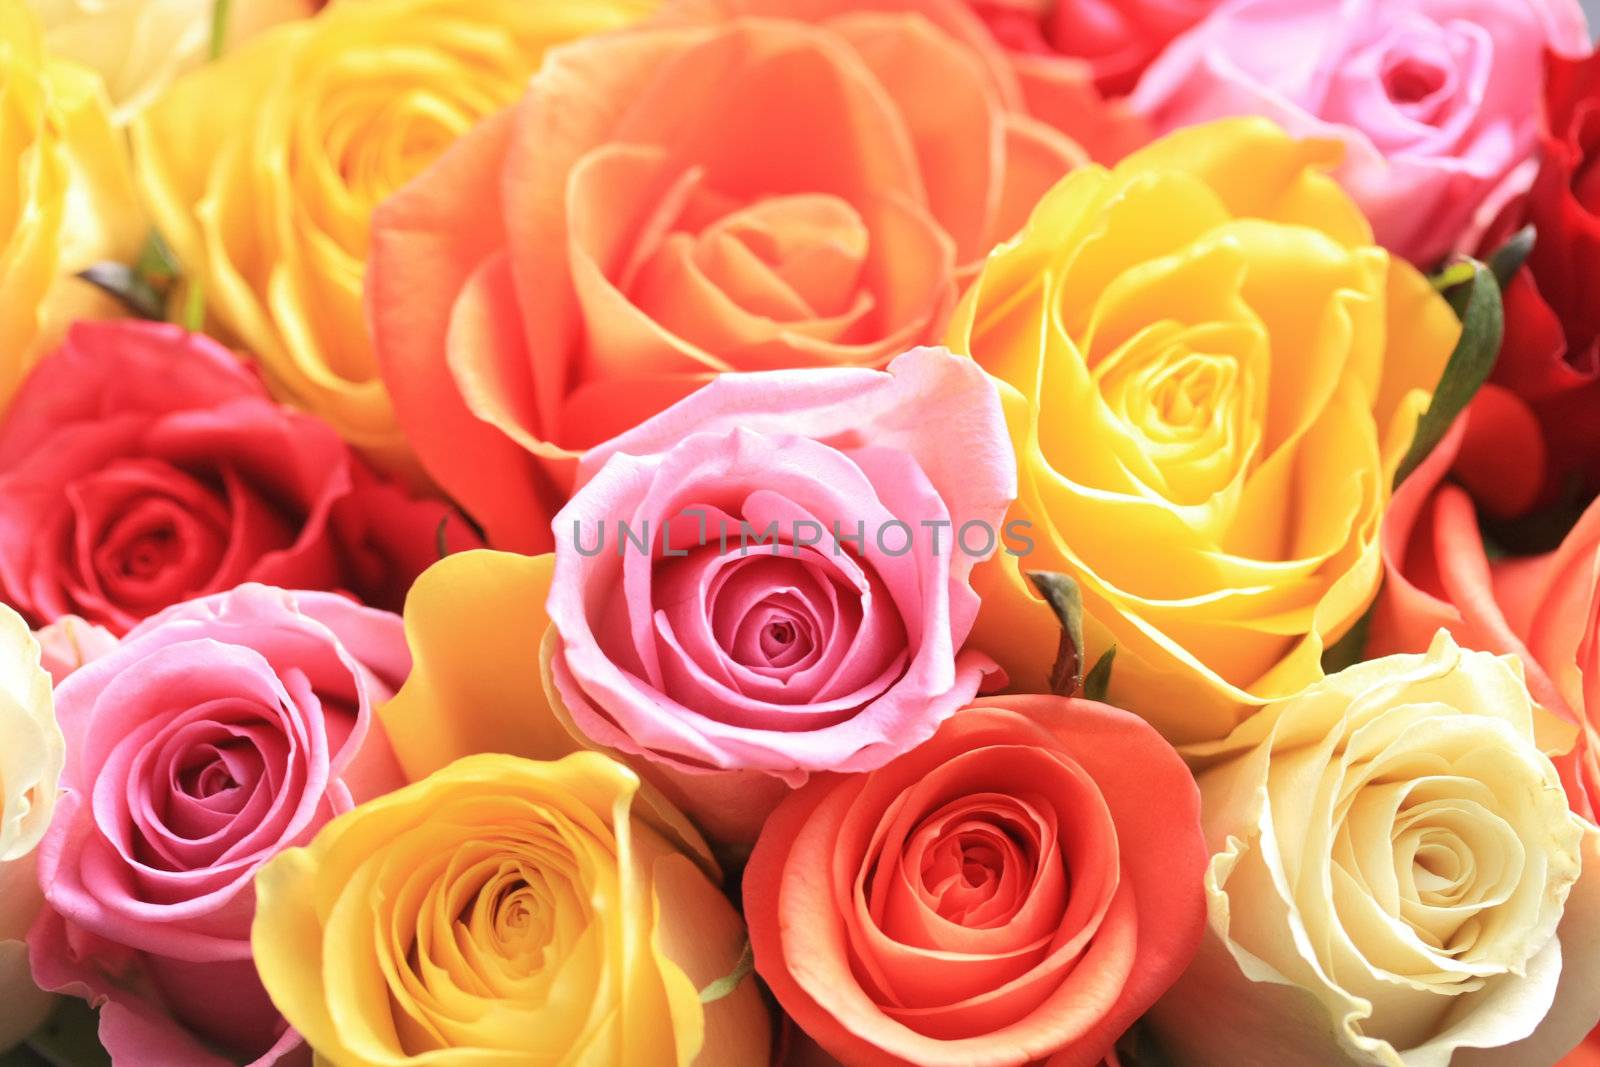 A mixed rose bouquet of different colors 